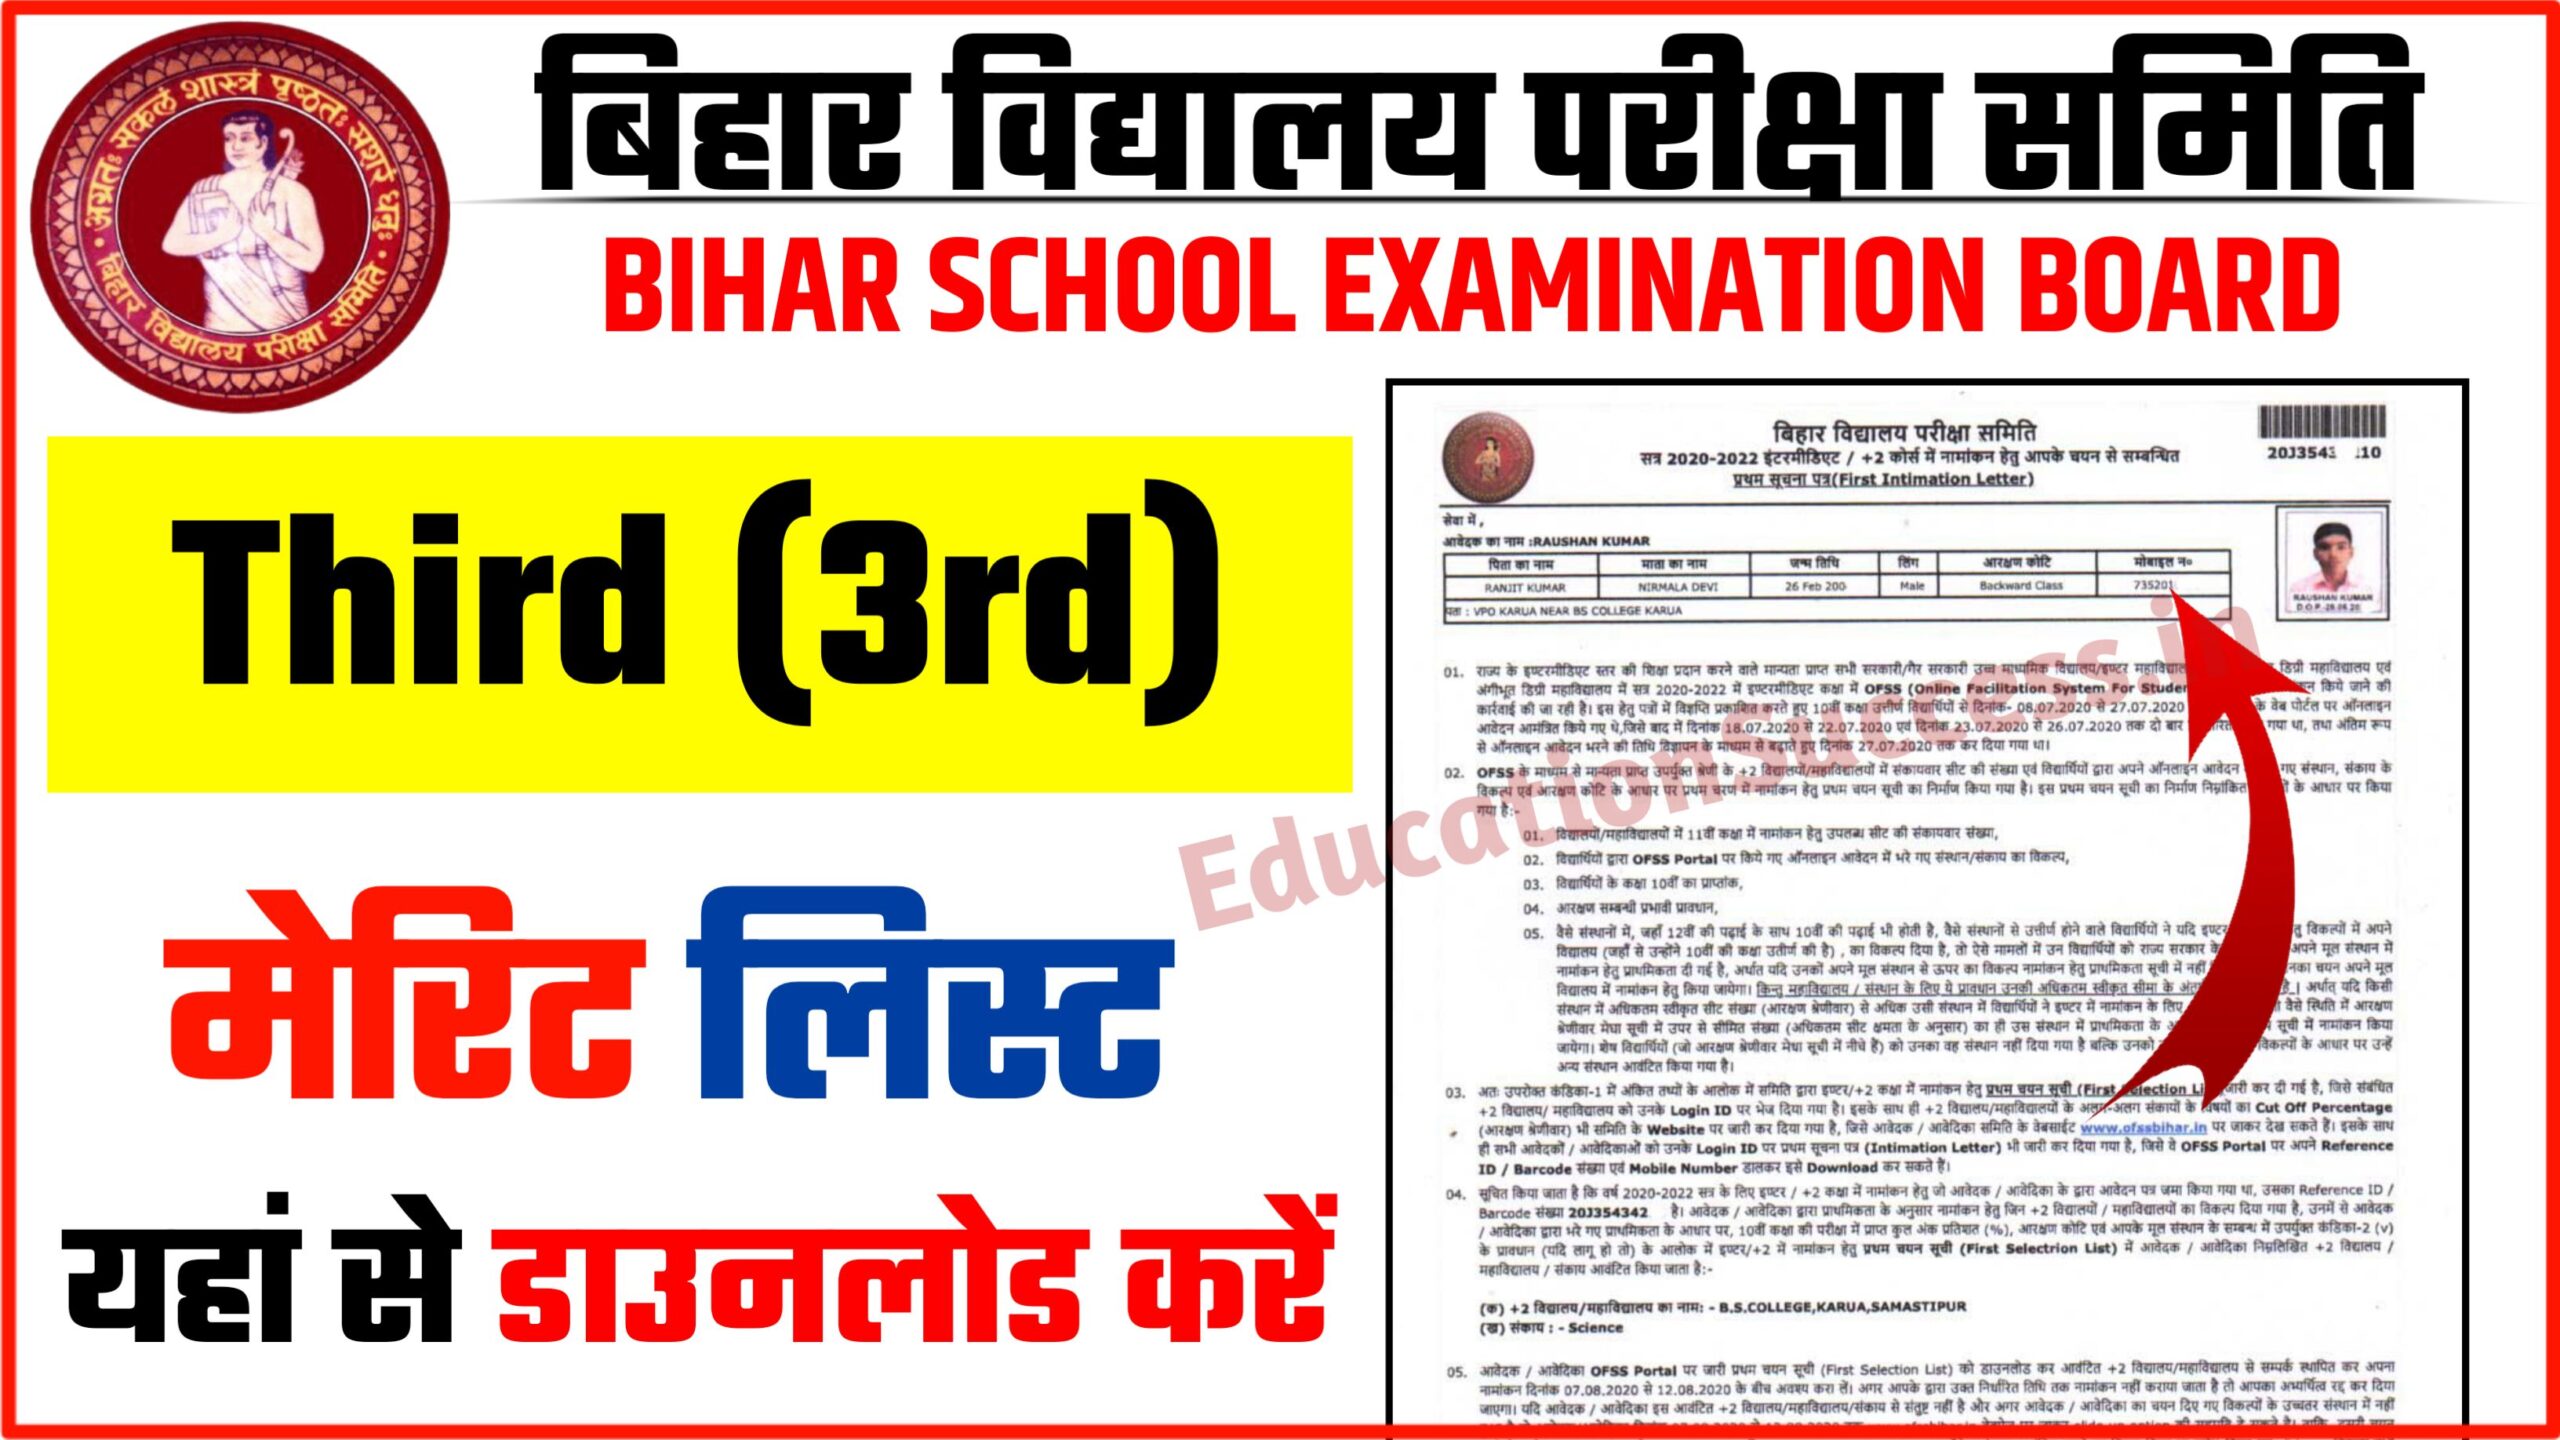 BSEB 11th 3rd Merit List Out Download Link Active: